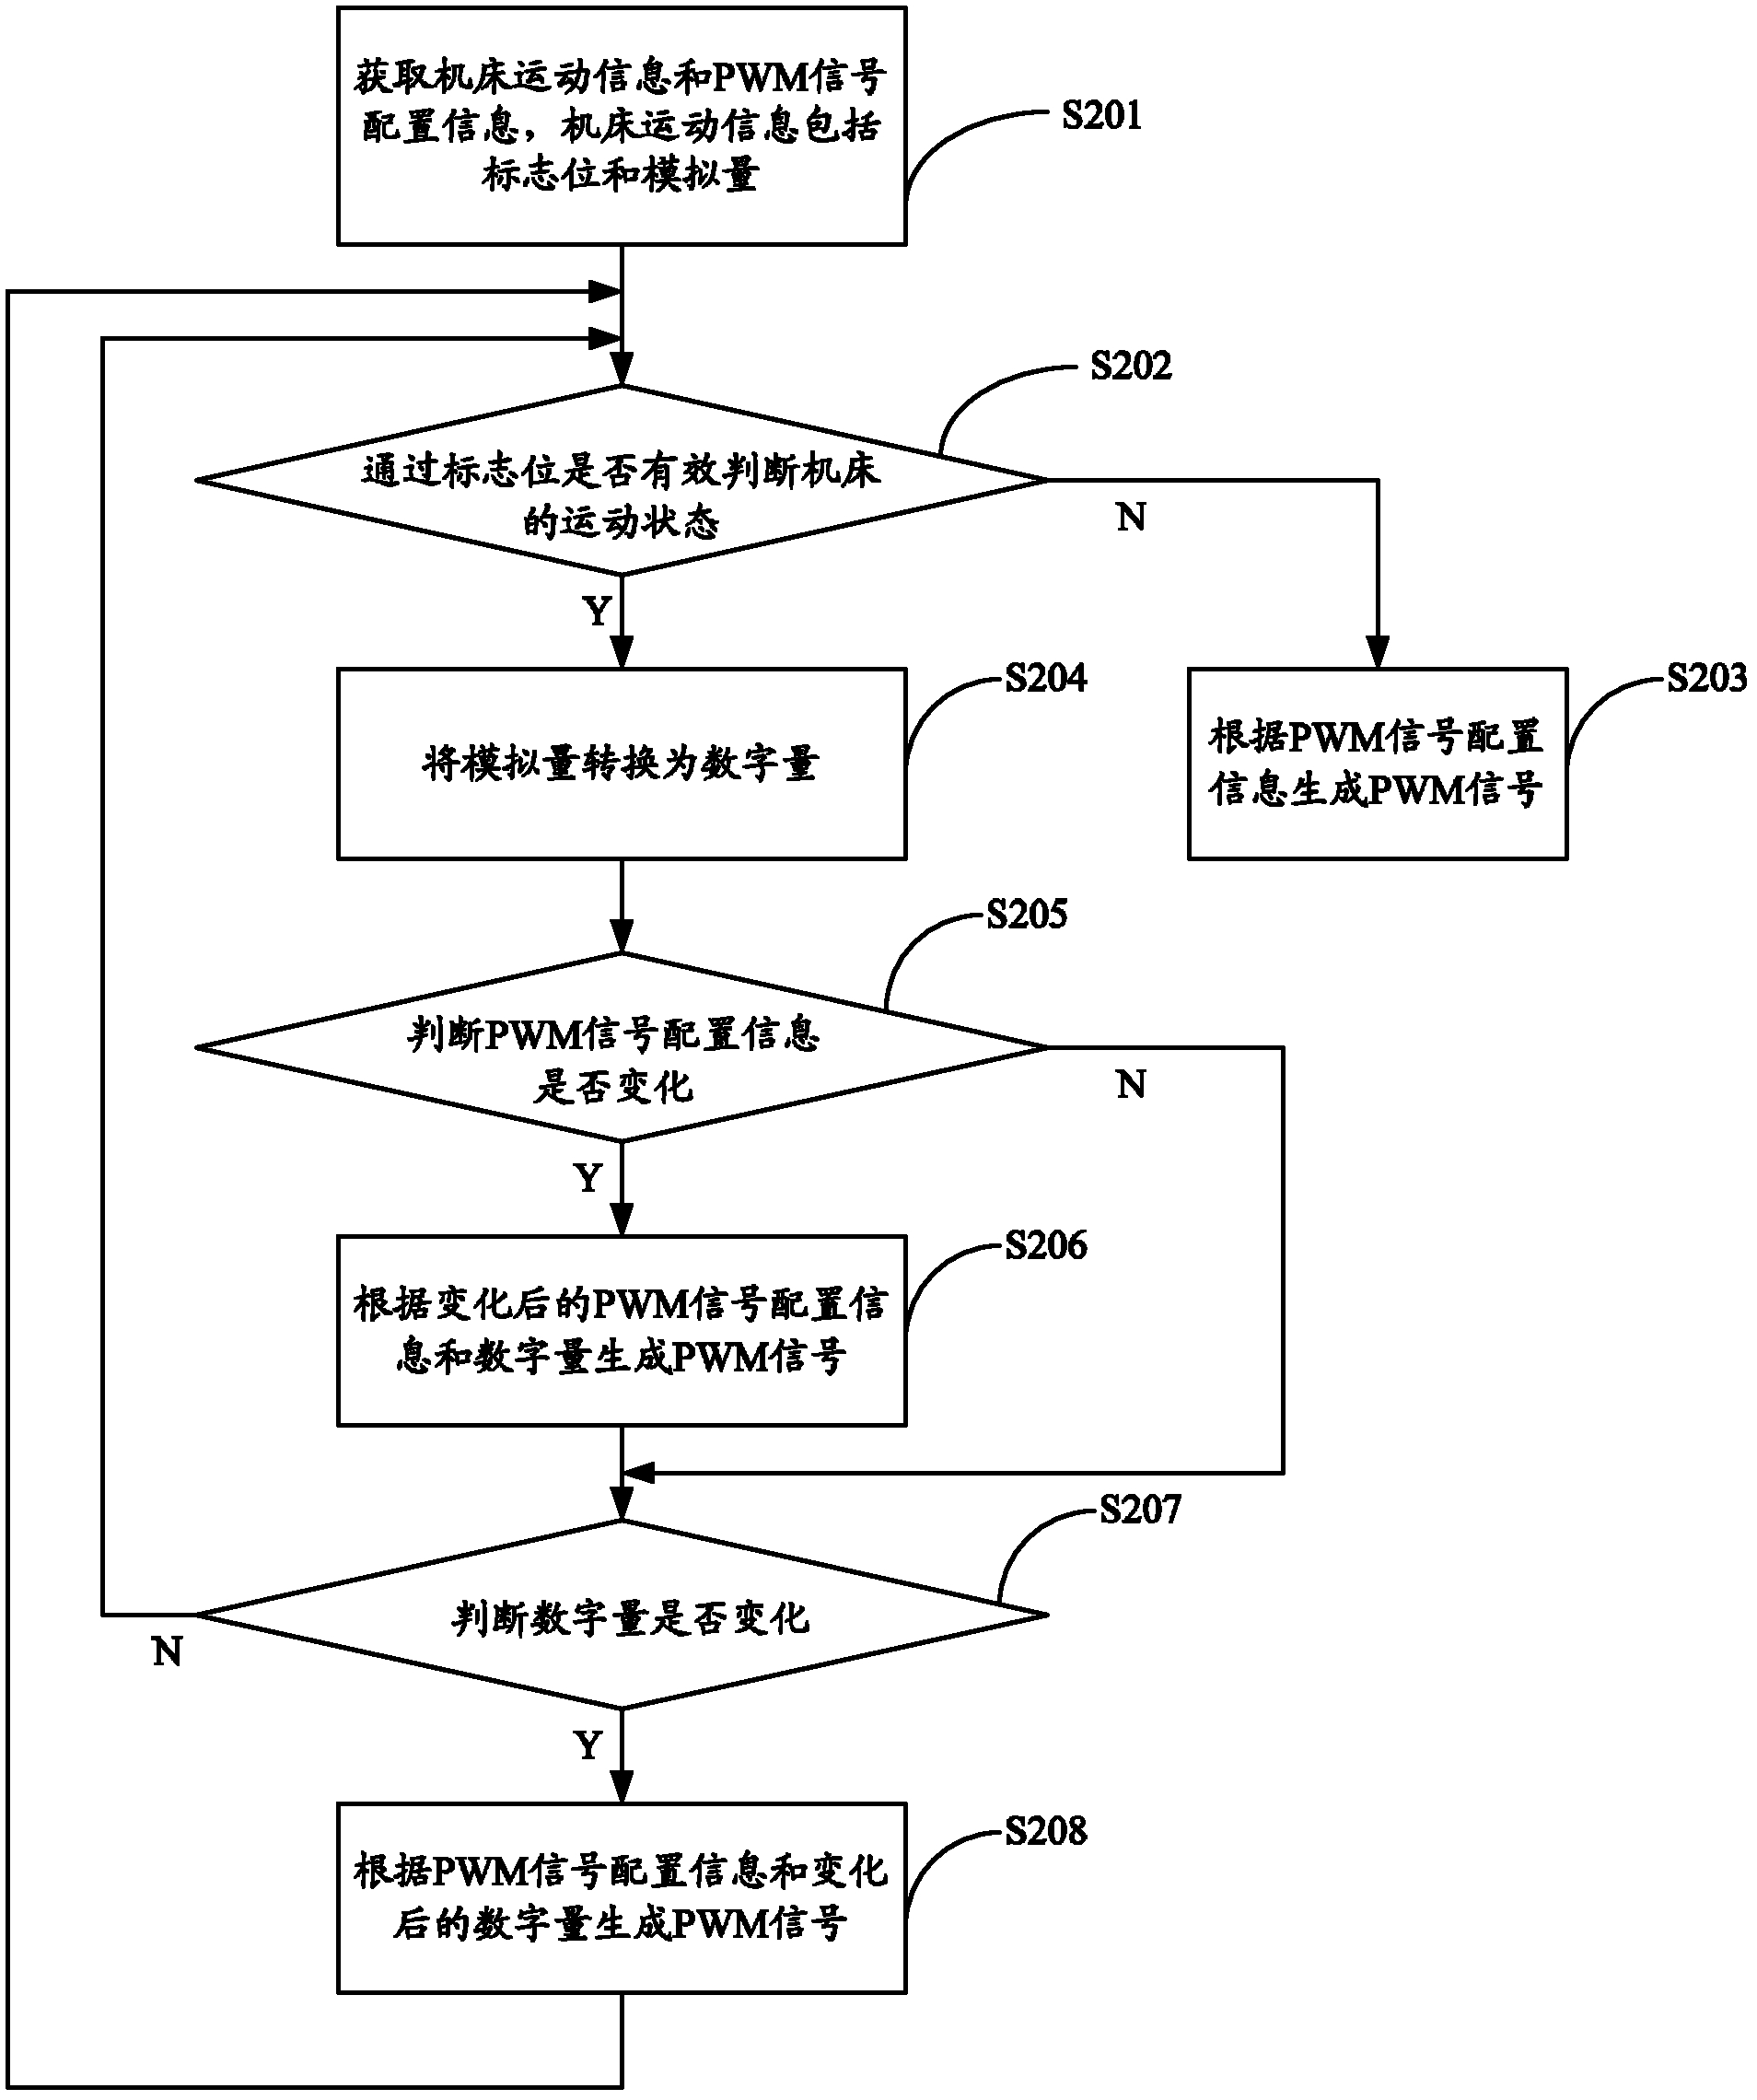 Control method and control system of pulse width modulation (PWM) signals and numerical control laser processing machine tool